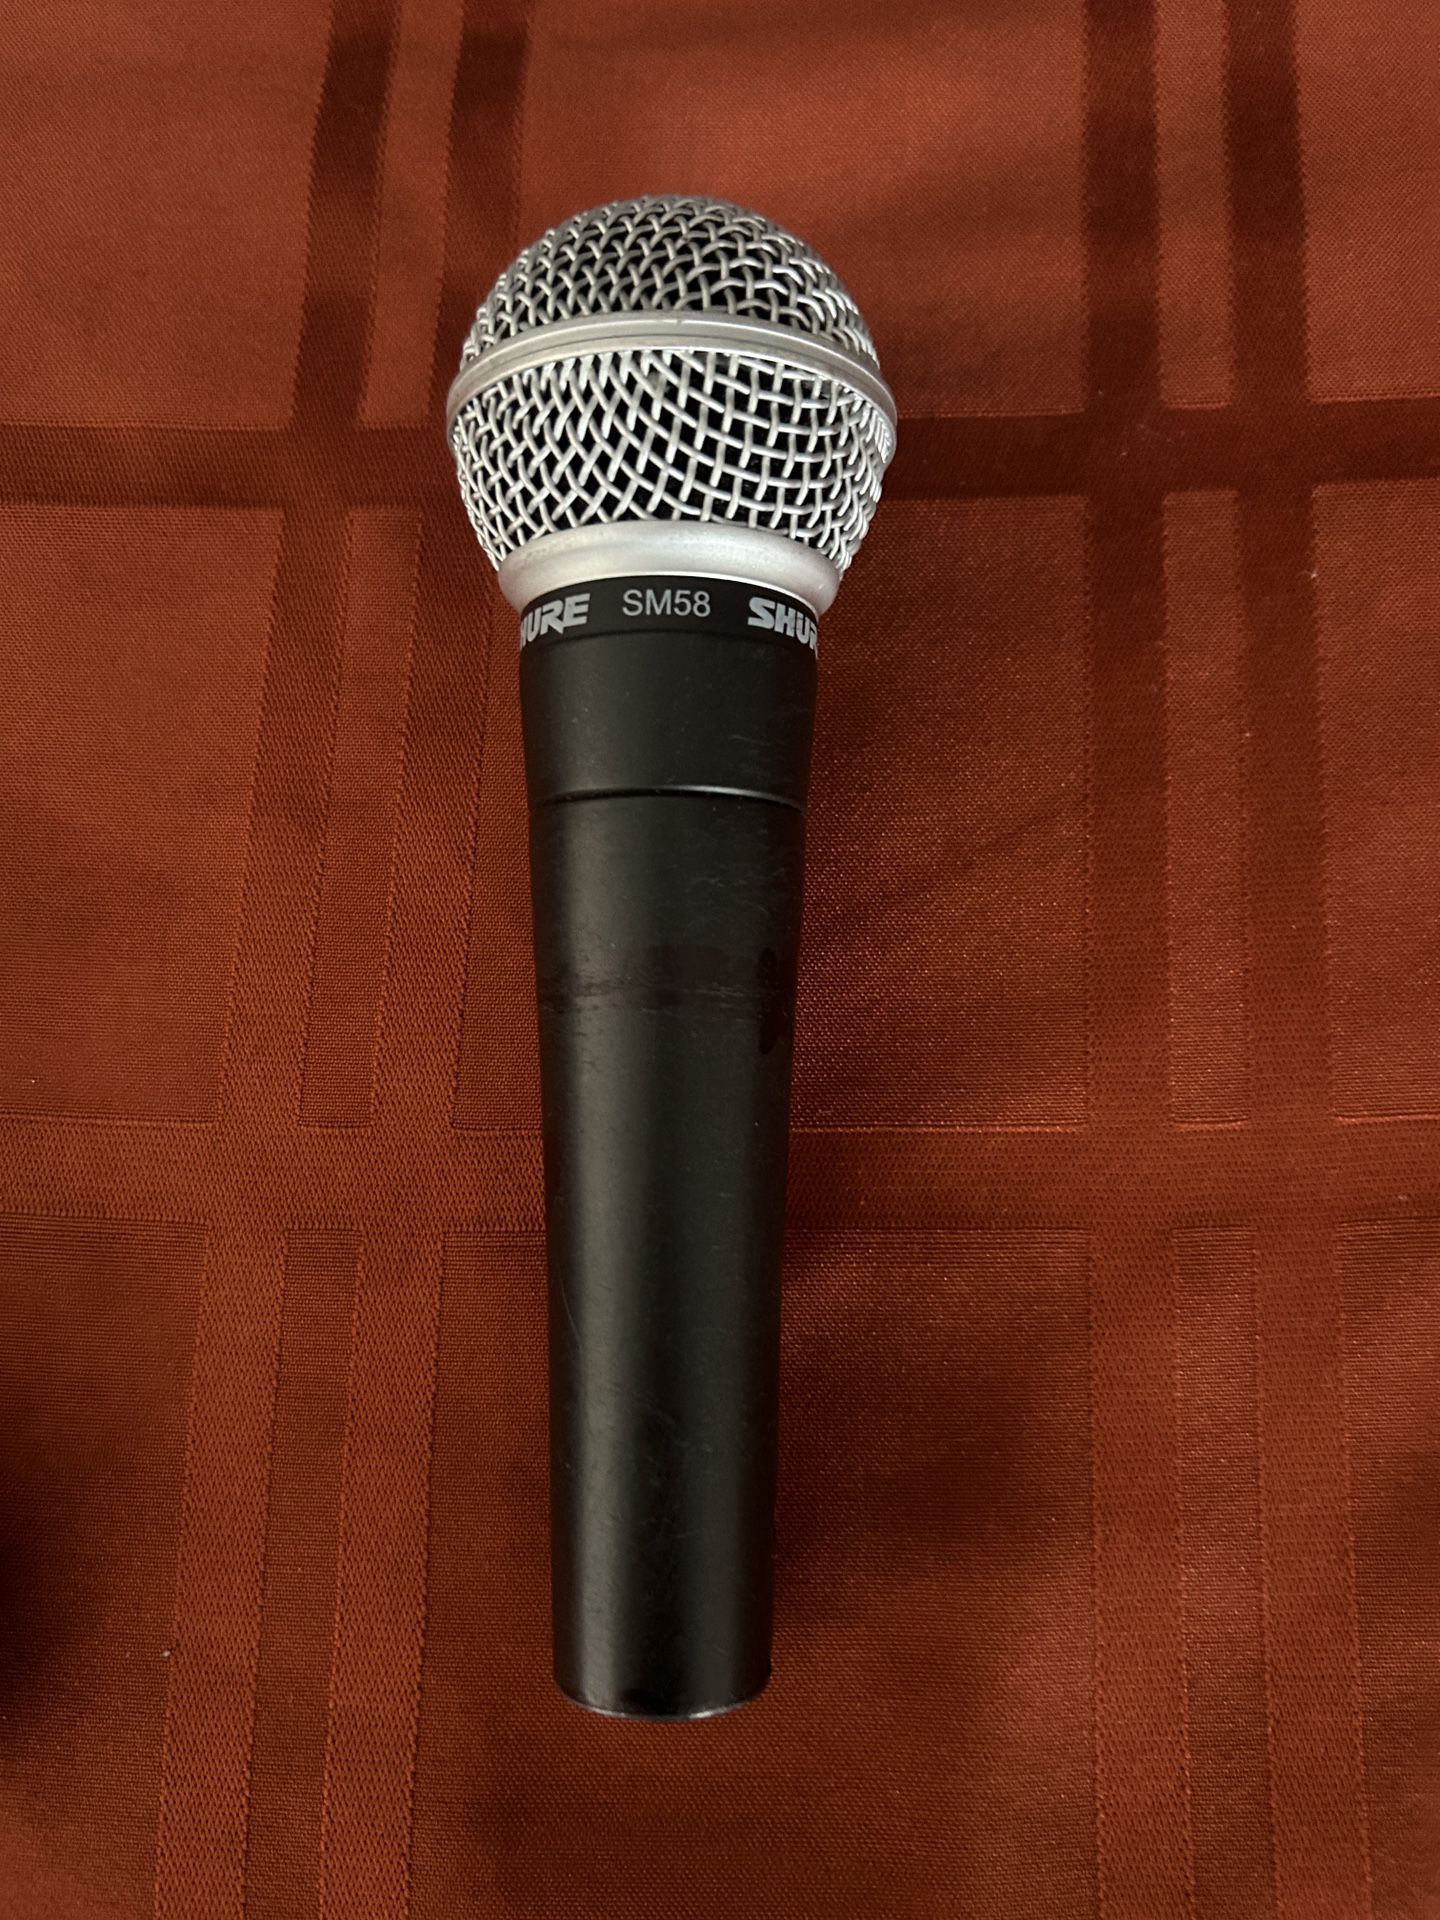 Shure SM58 Microphone - Used